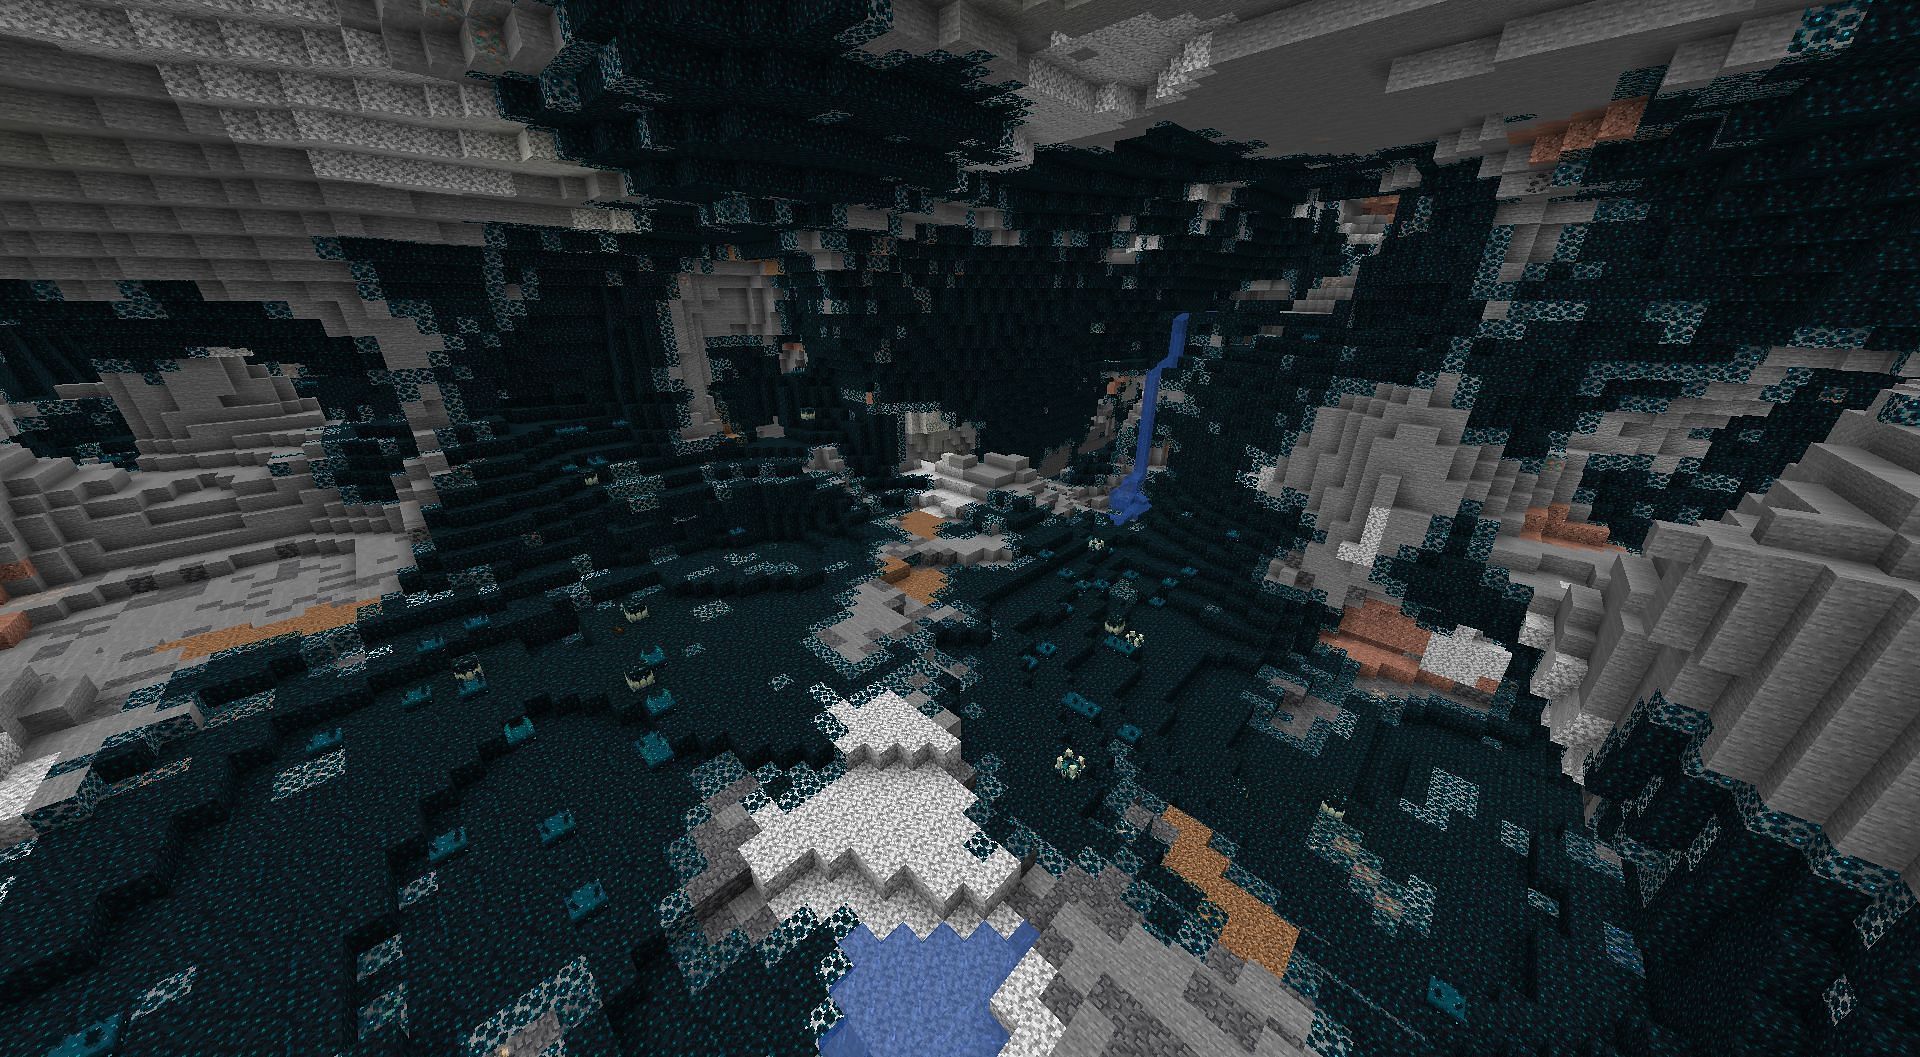 Deep Dark biome is worth checking out in Minecraft, despite it being extremely dangerous (Image via Mojang)